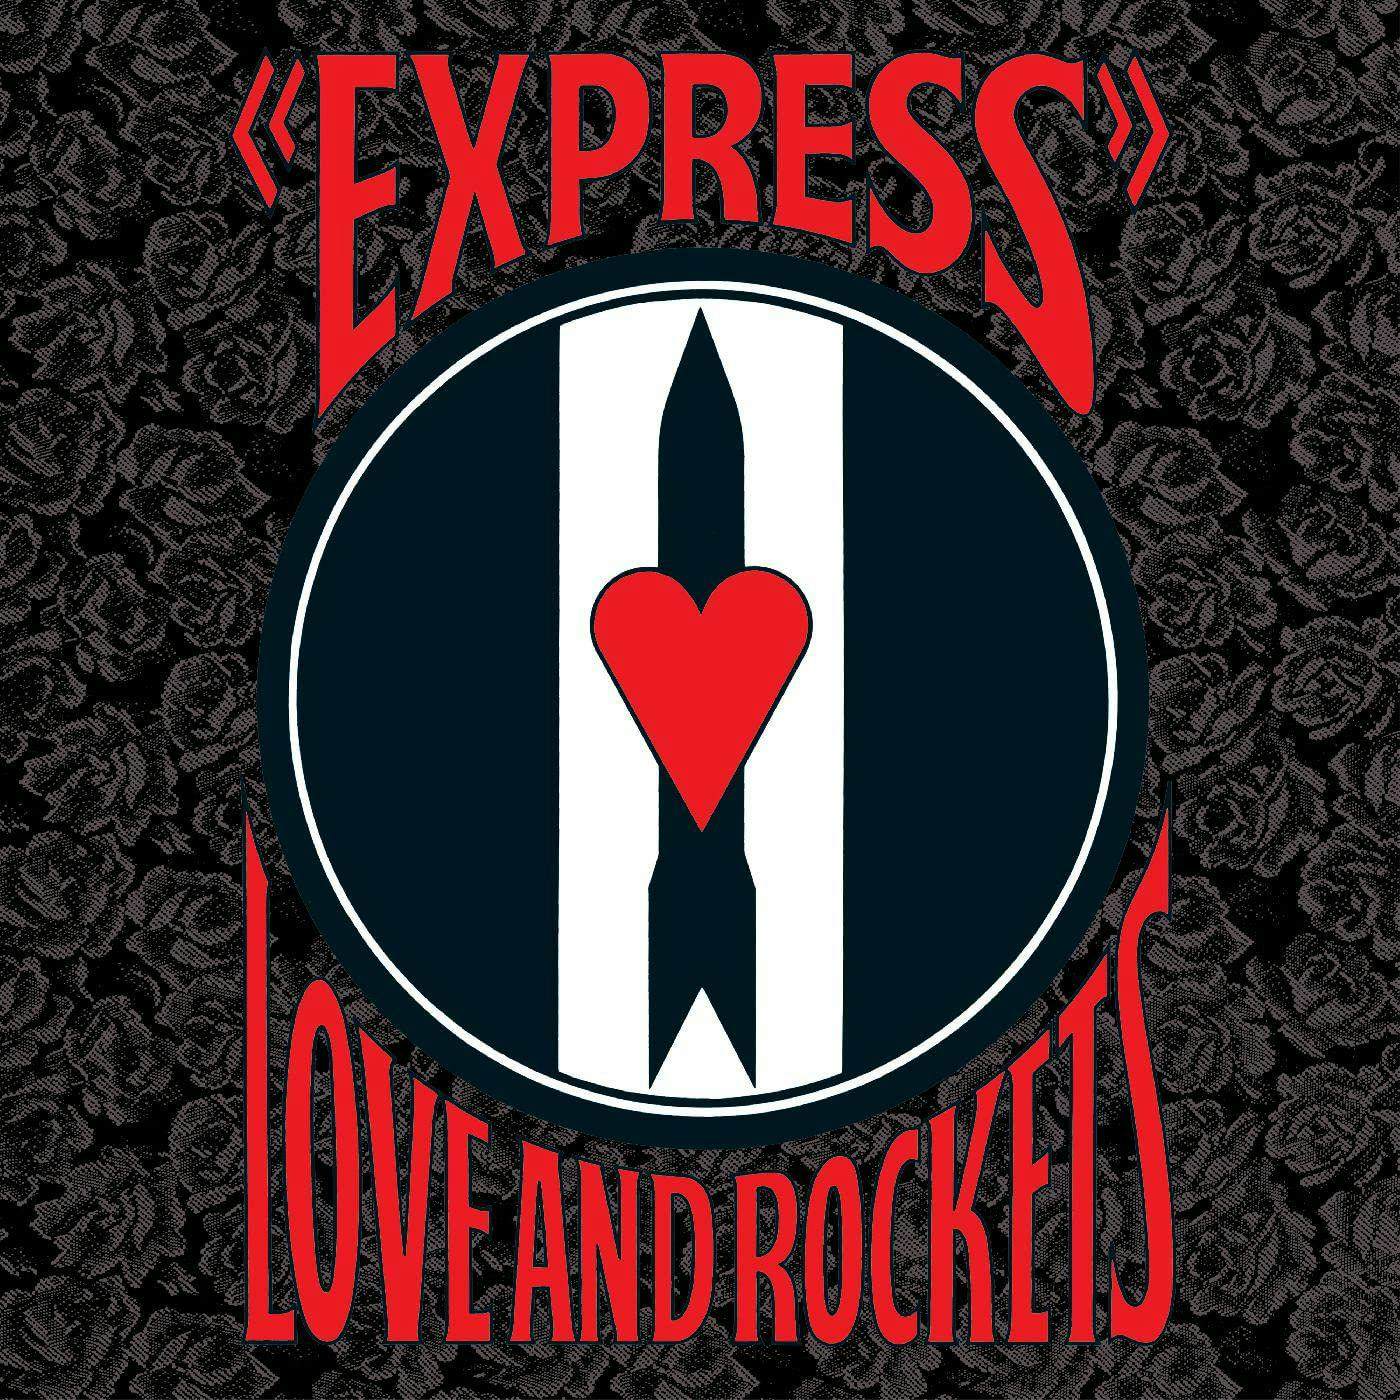 Love and Rockets - Hot Trip to Heaven T-Shirt